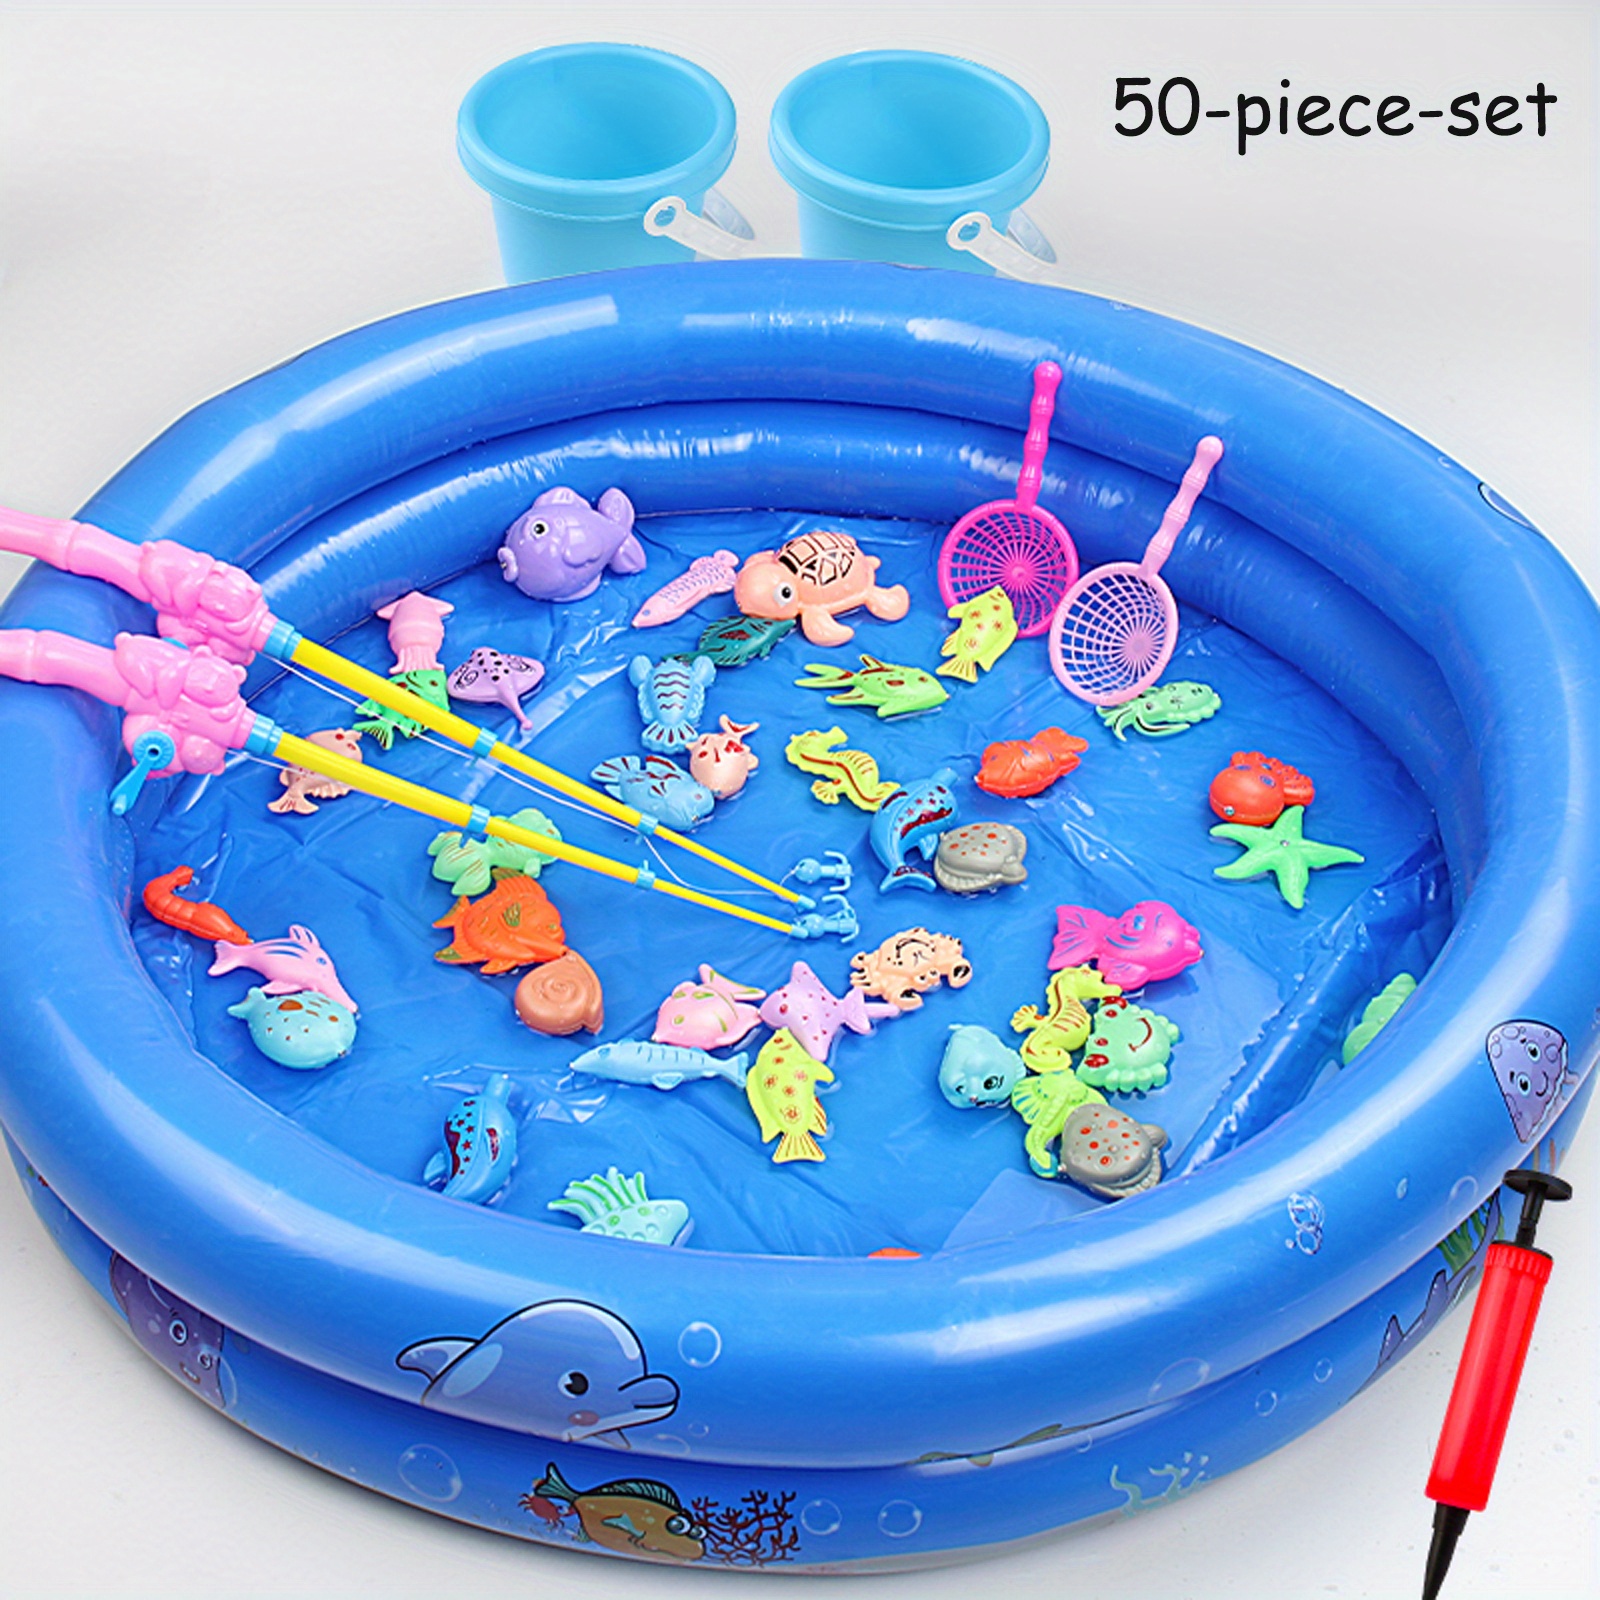 Fun Magnetic Fishing Game For Kids - Inflatable Swimming Pool Included!